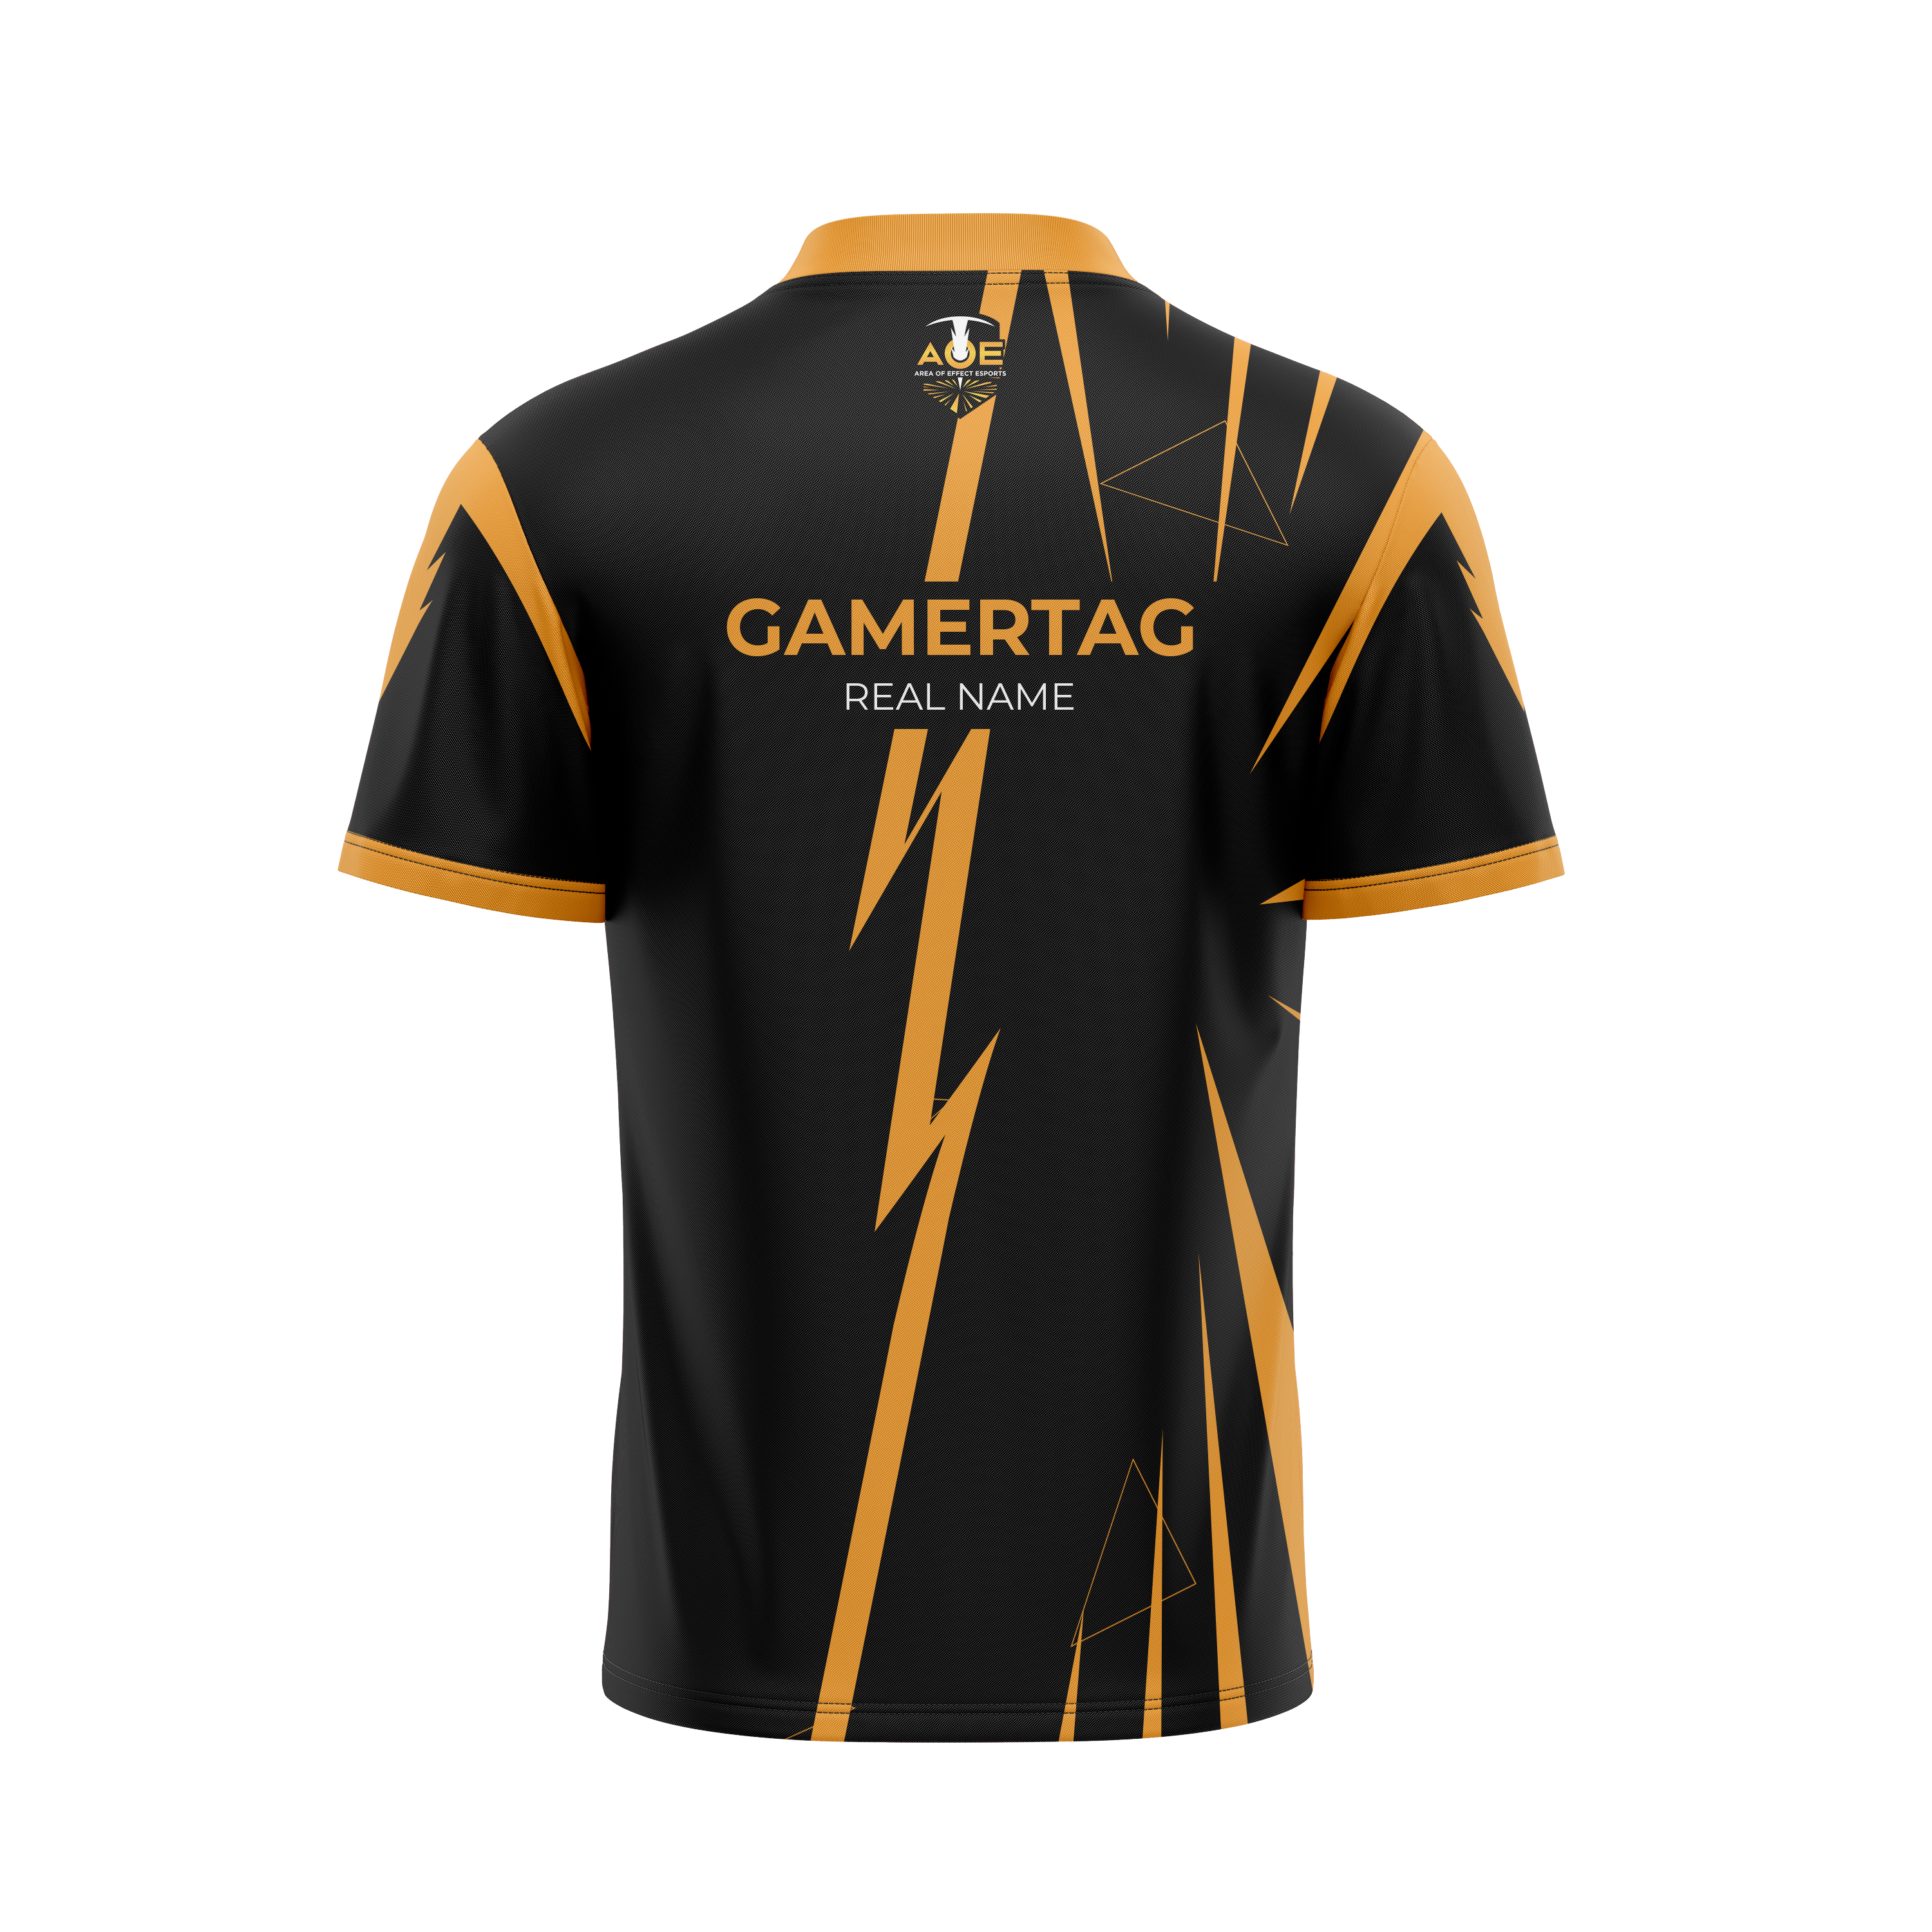 Area of Effect Esports Jersey